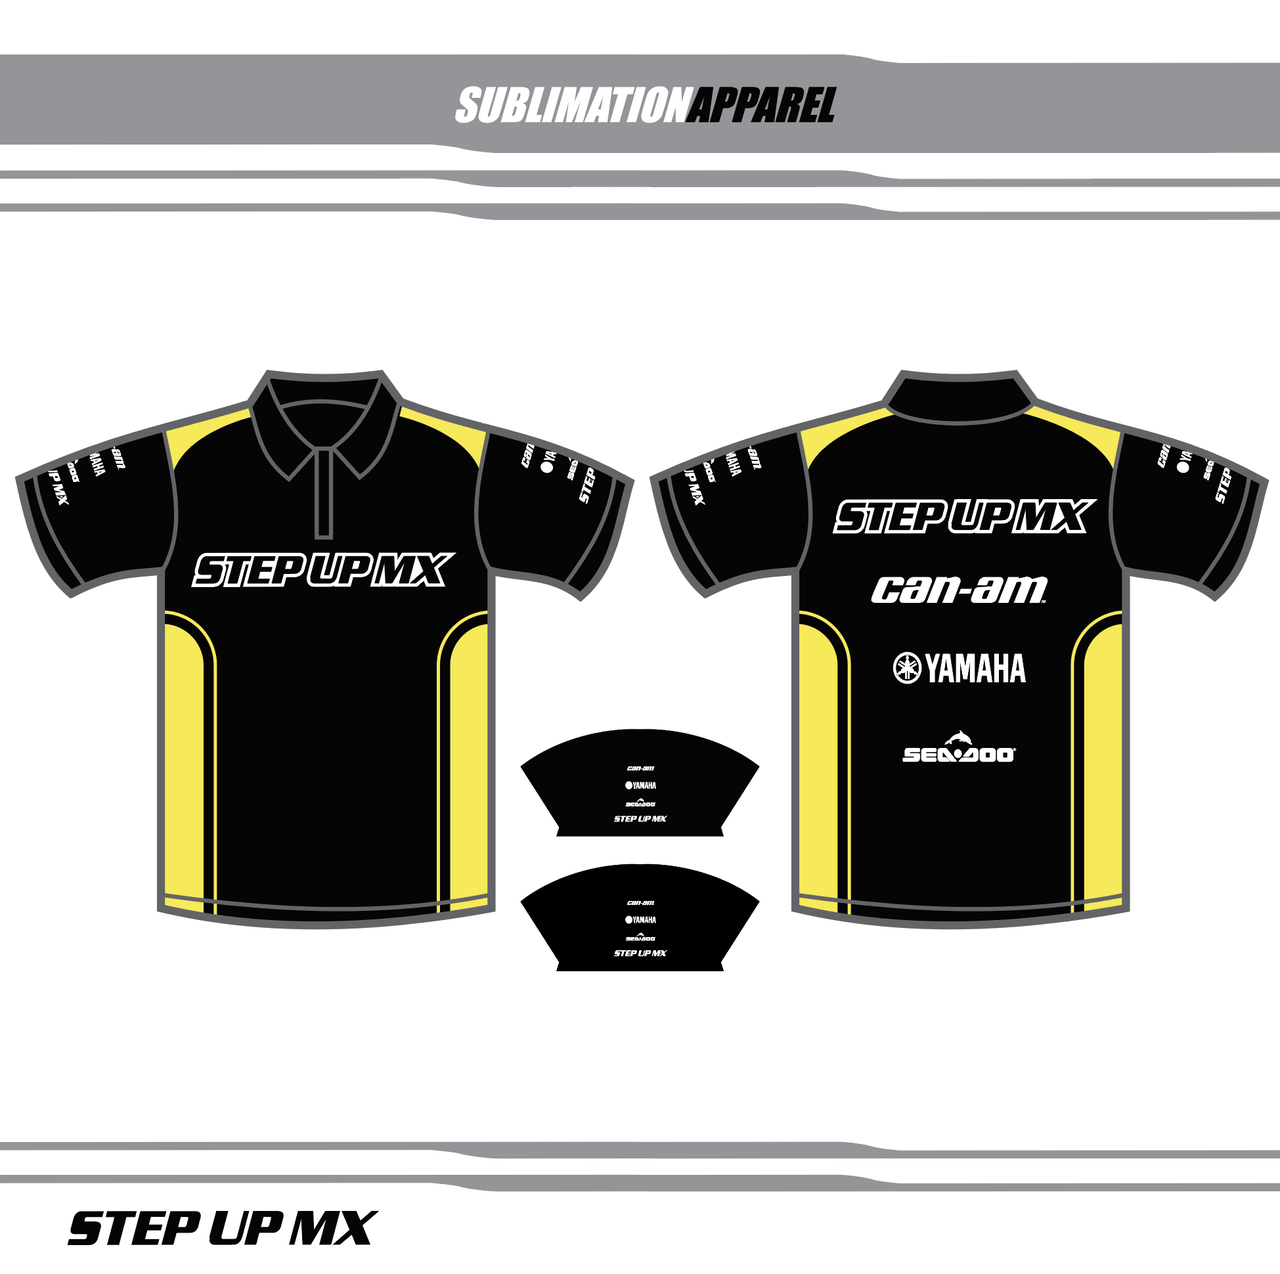 Custom Printed Sports Jersey Sublimated Apparel For Football